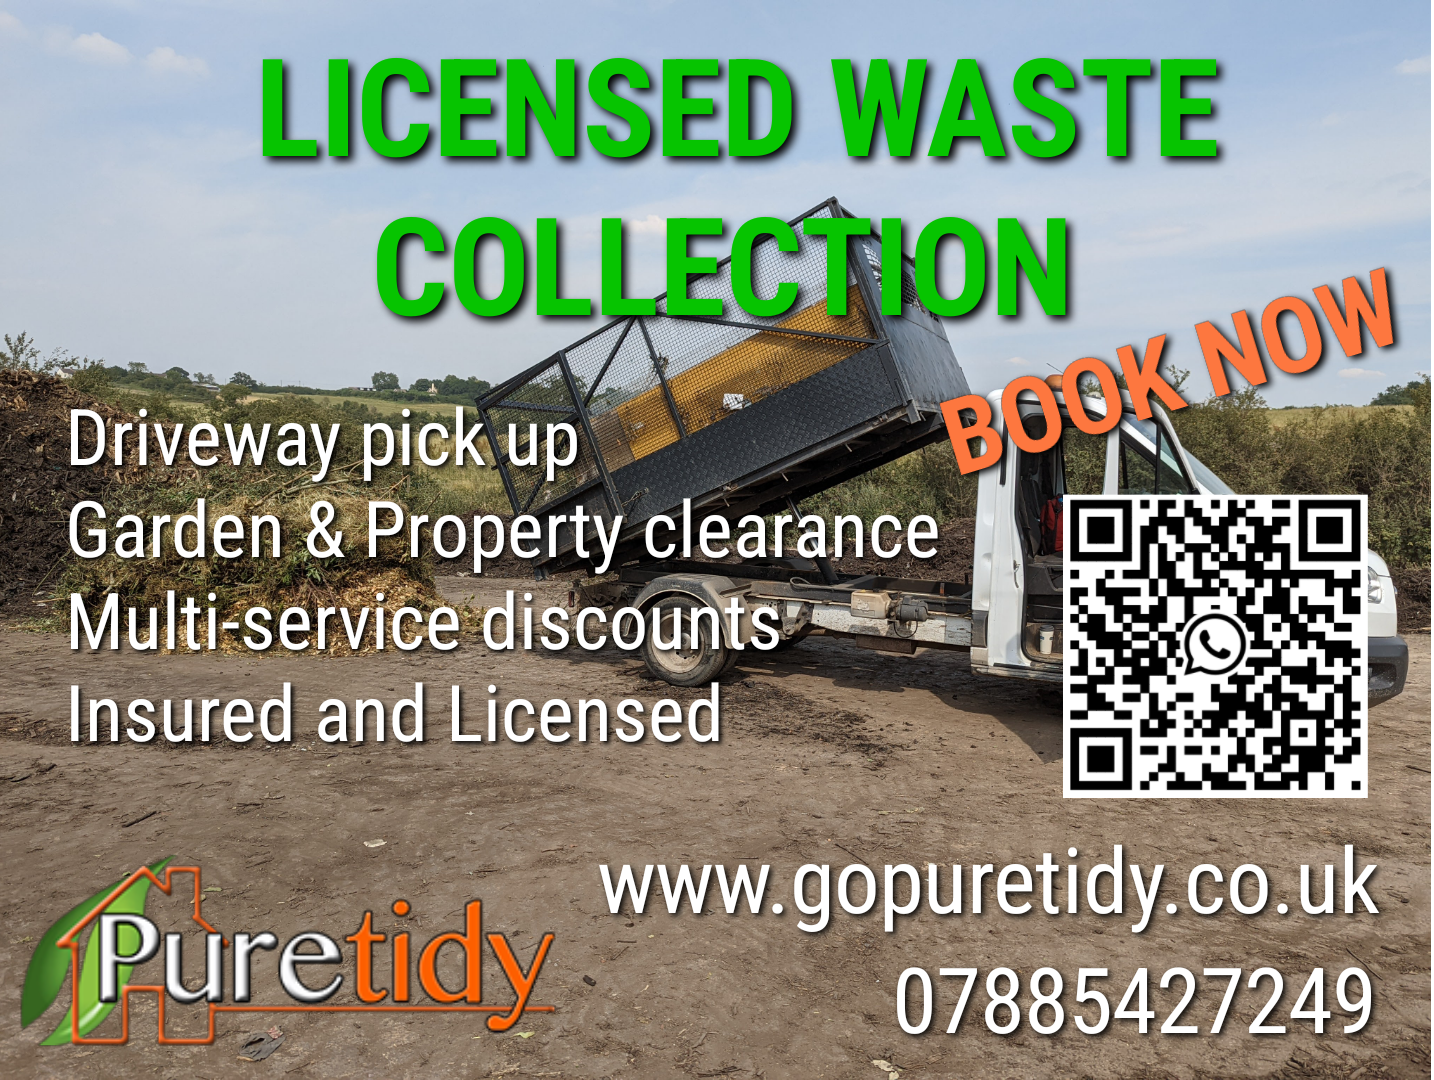 Licensed and insured waste collection and management Swindon Wiltshire.